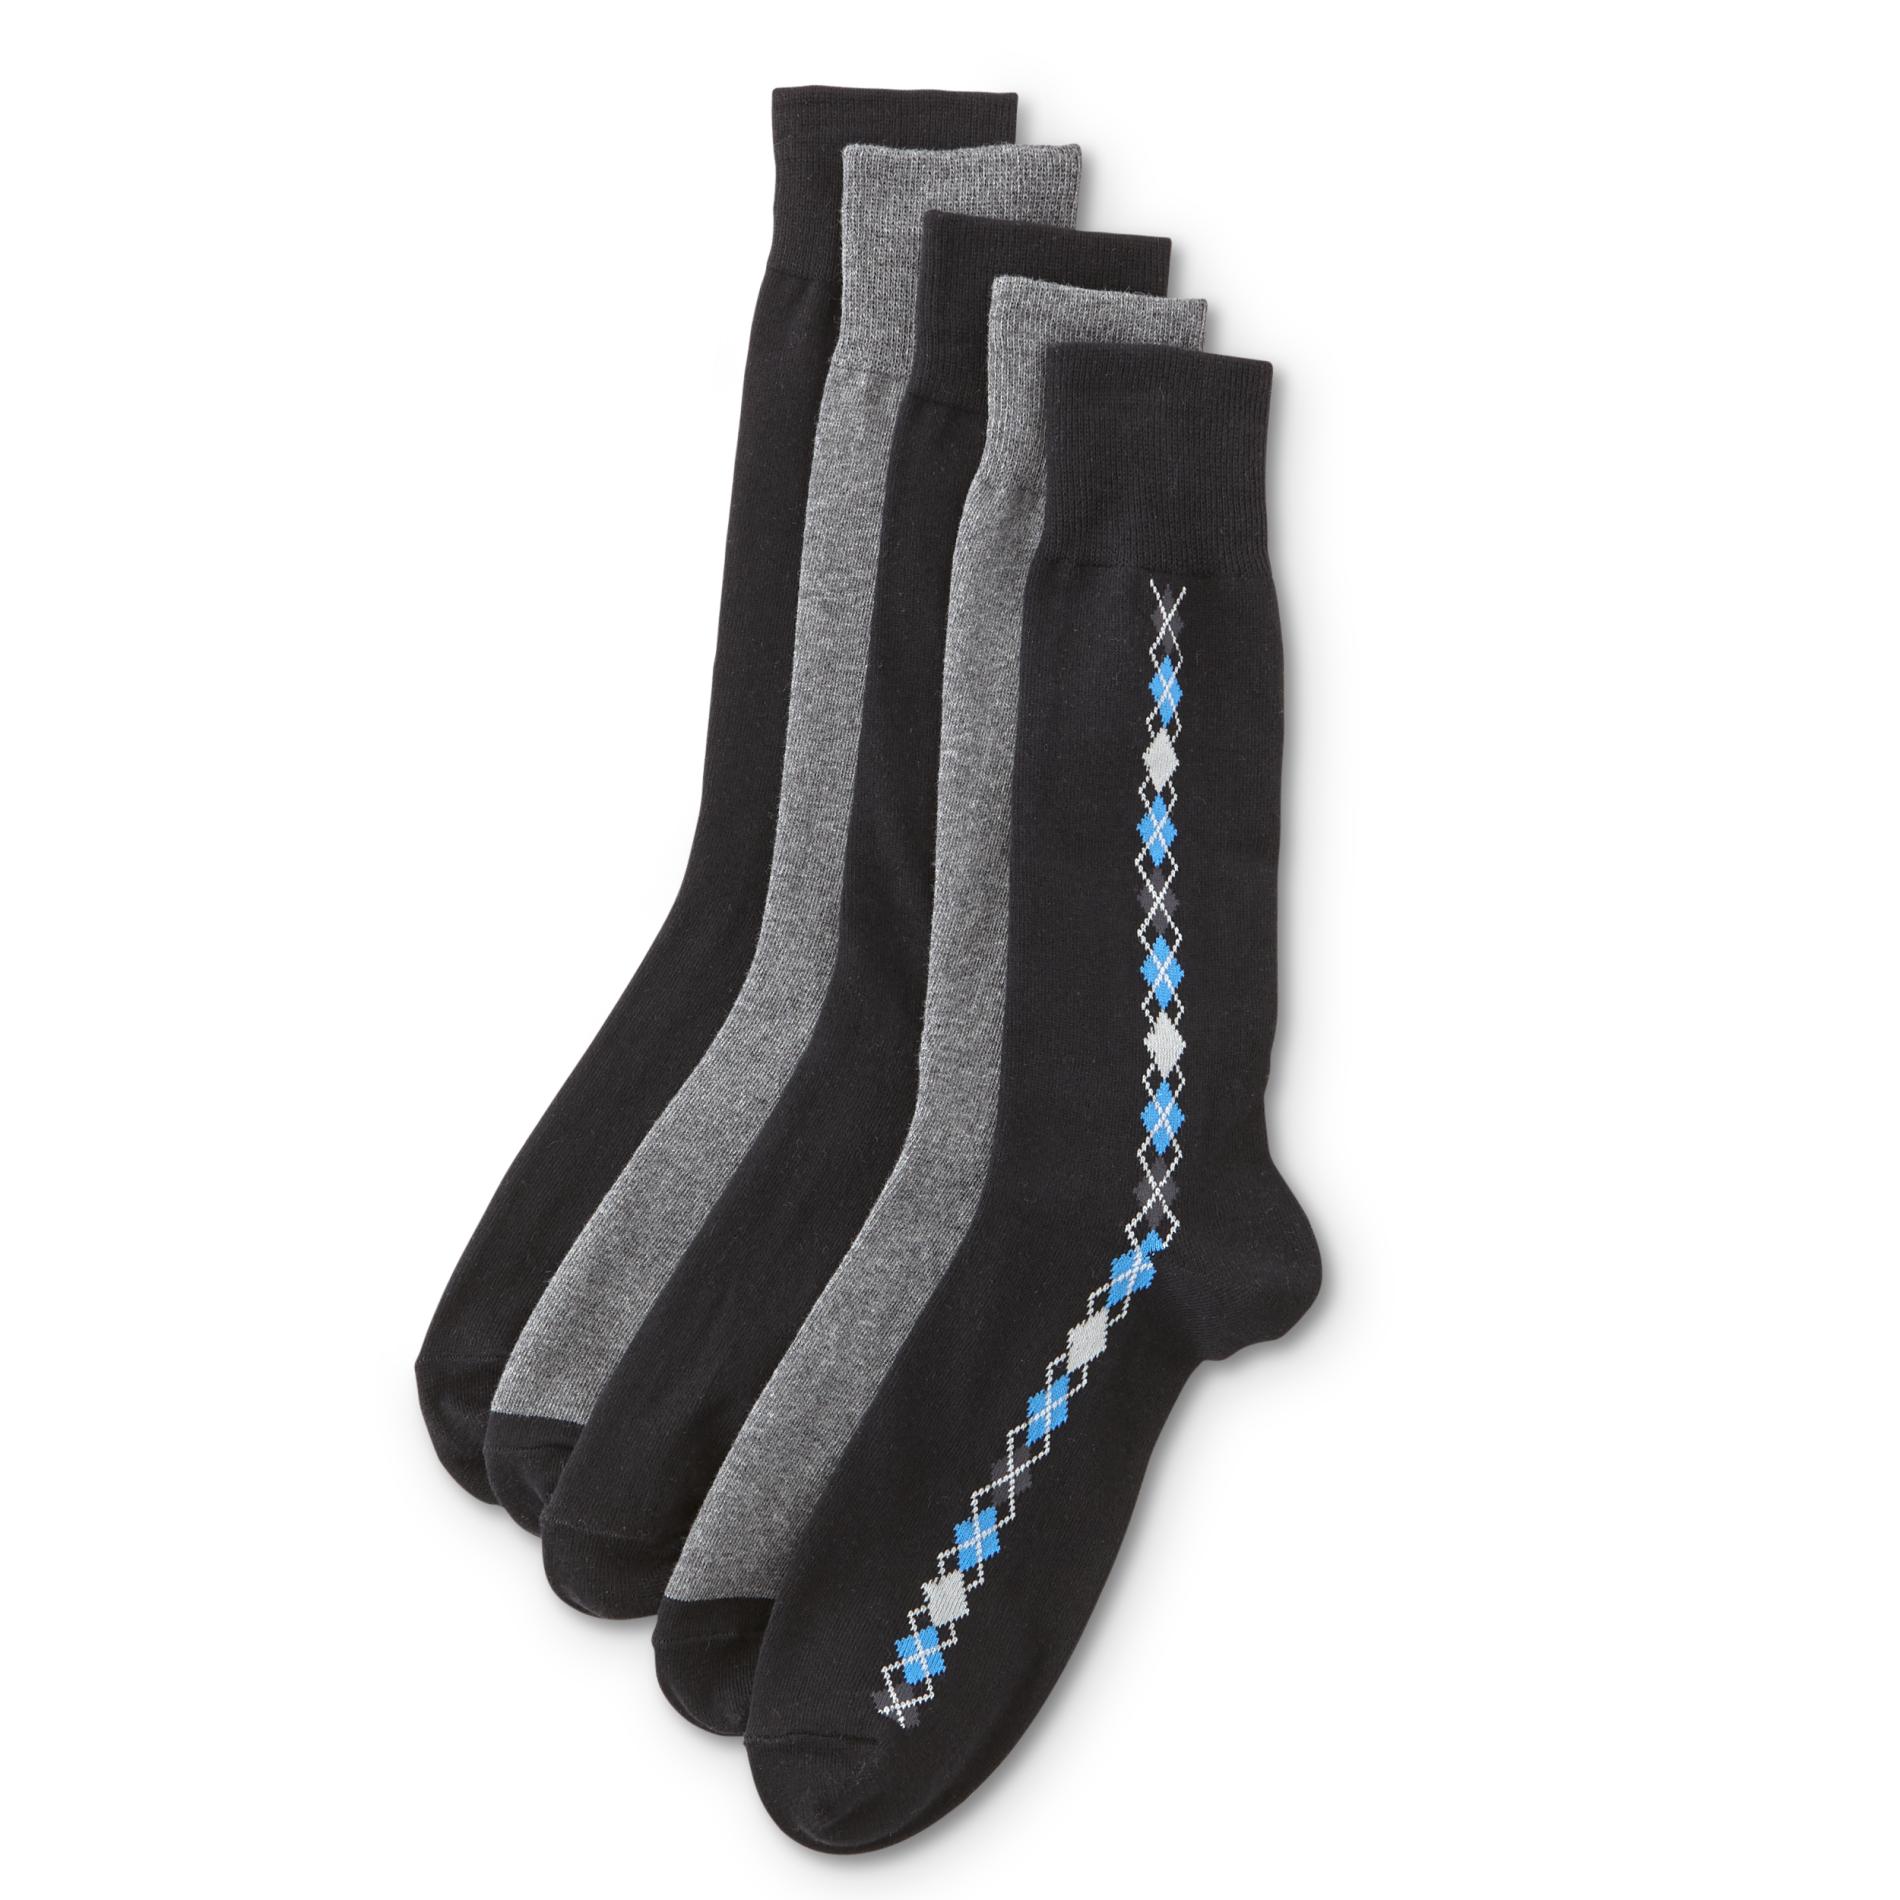 Structure Men's 5-Pairs Dress Socks - Argyle, Solid & Marled